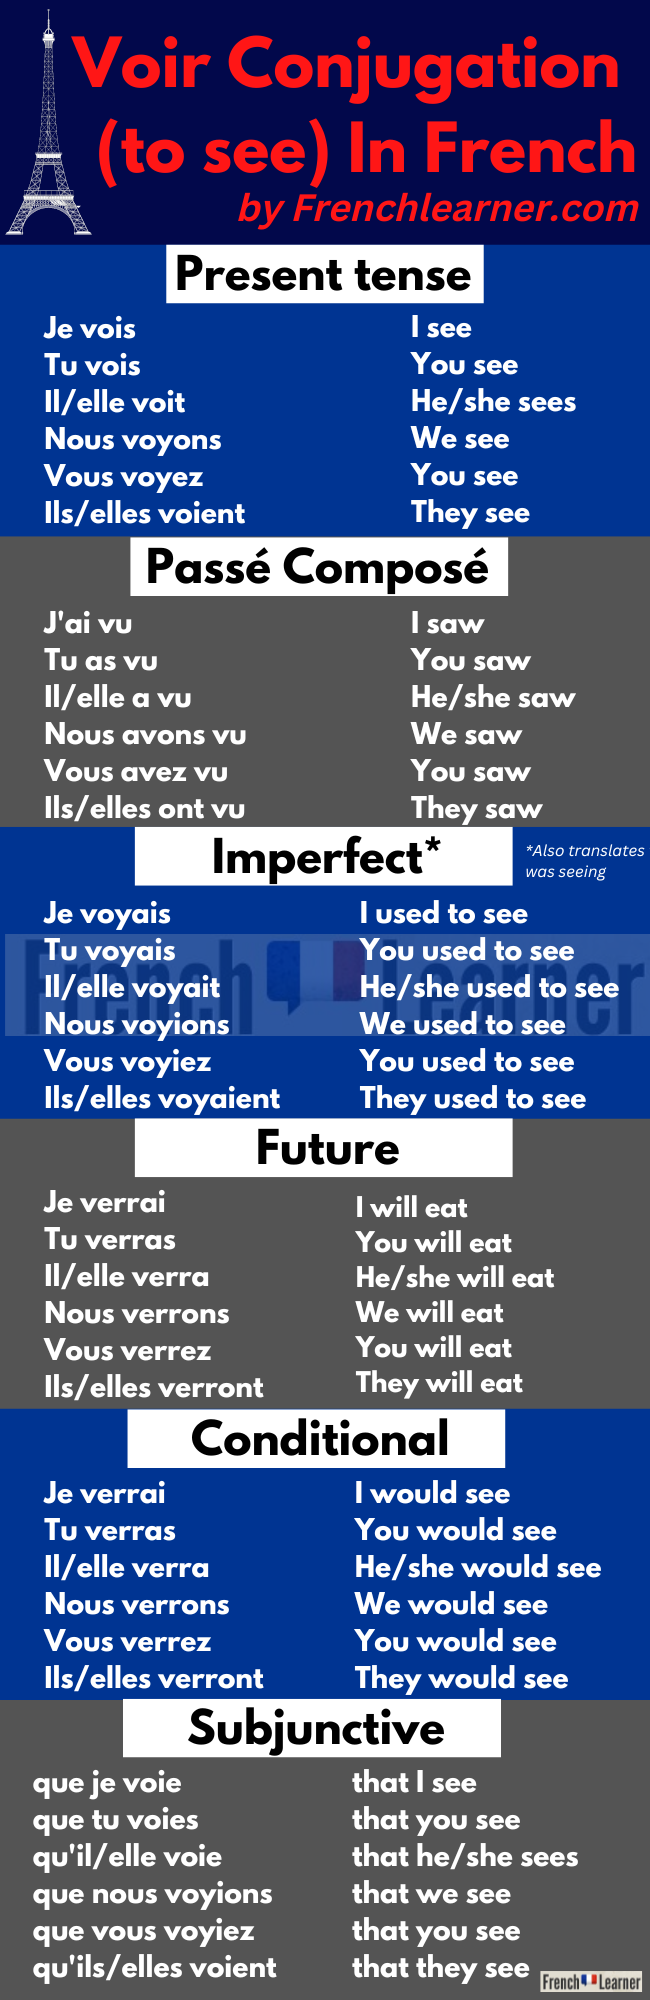 Voir Conjugation: How To Conjugate “To See” In French